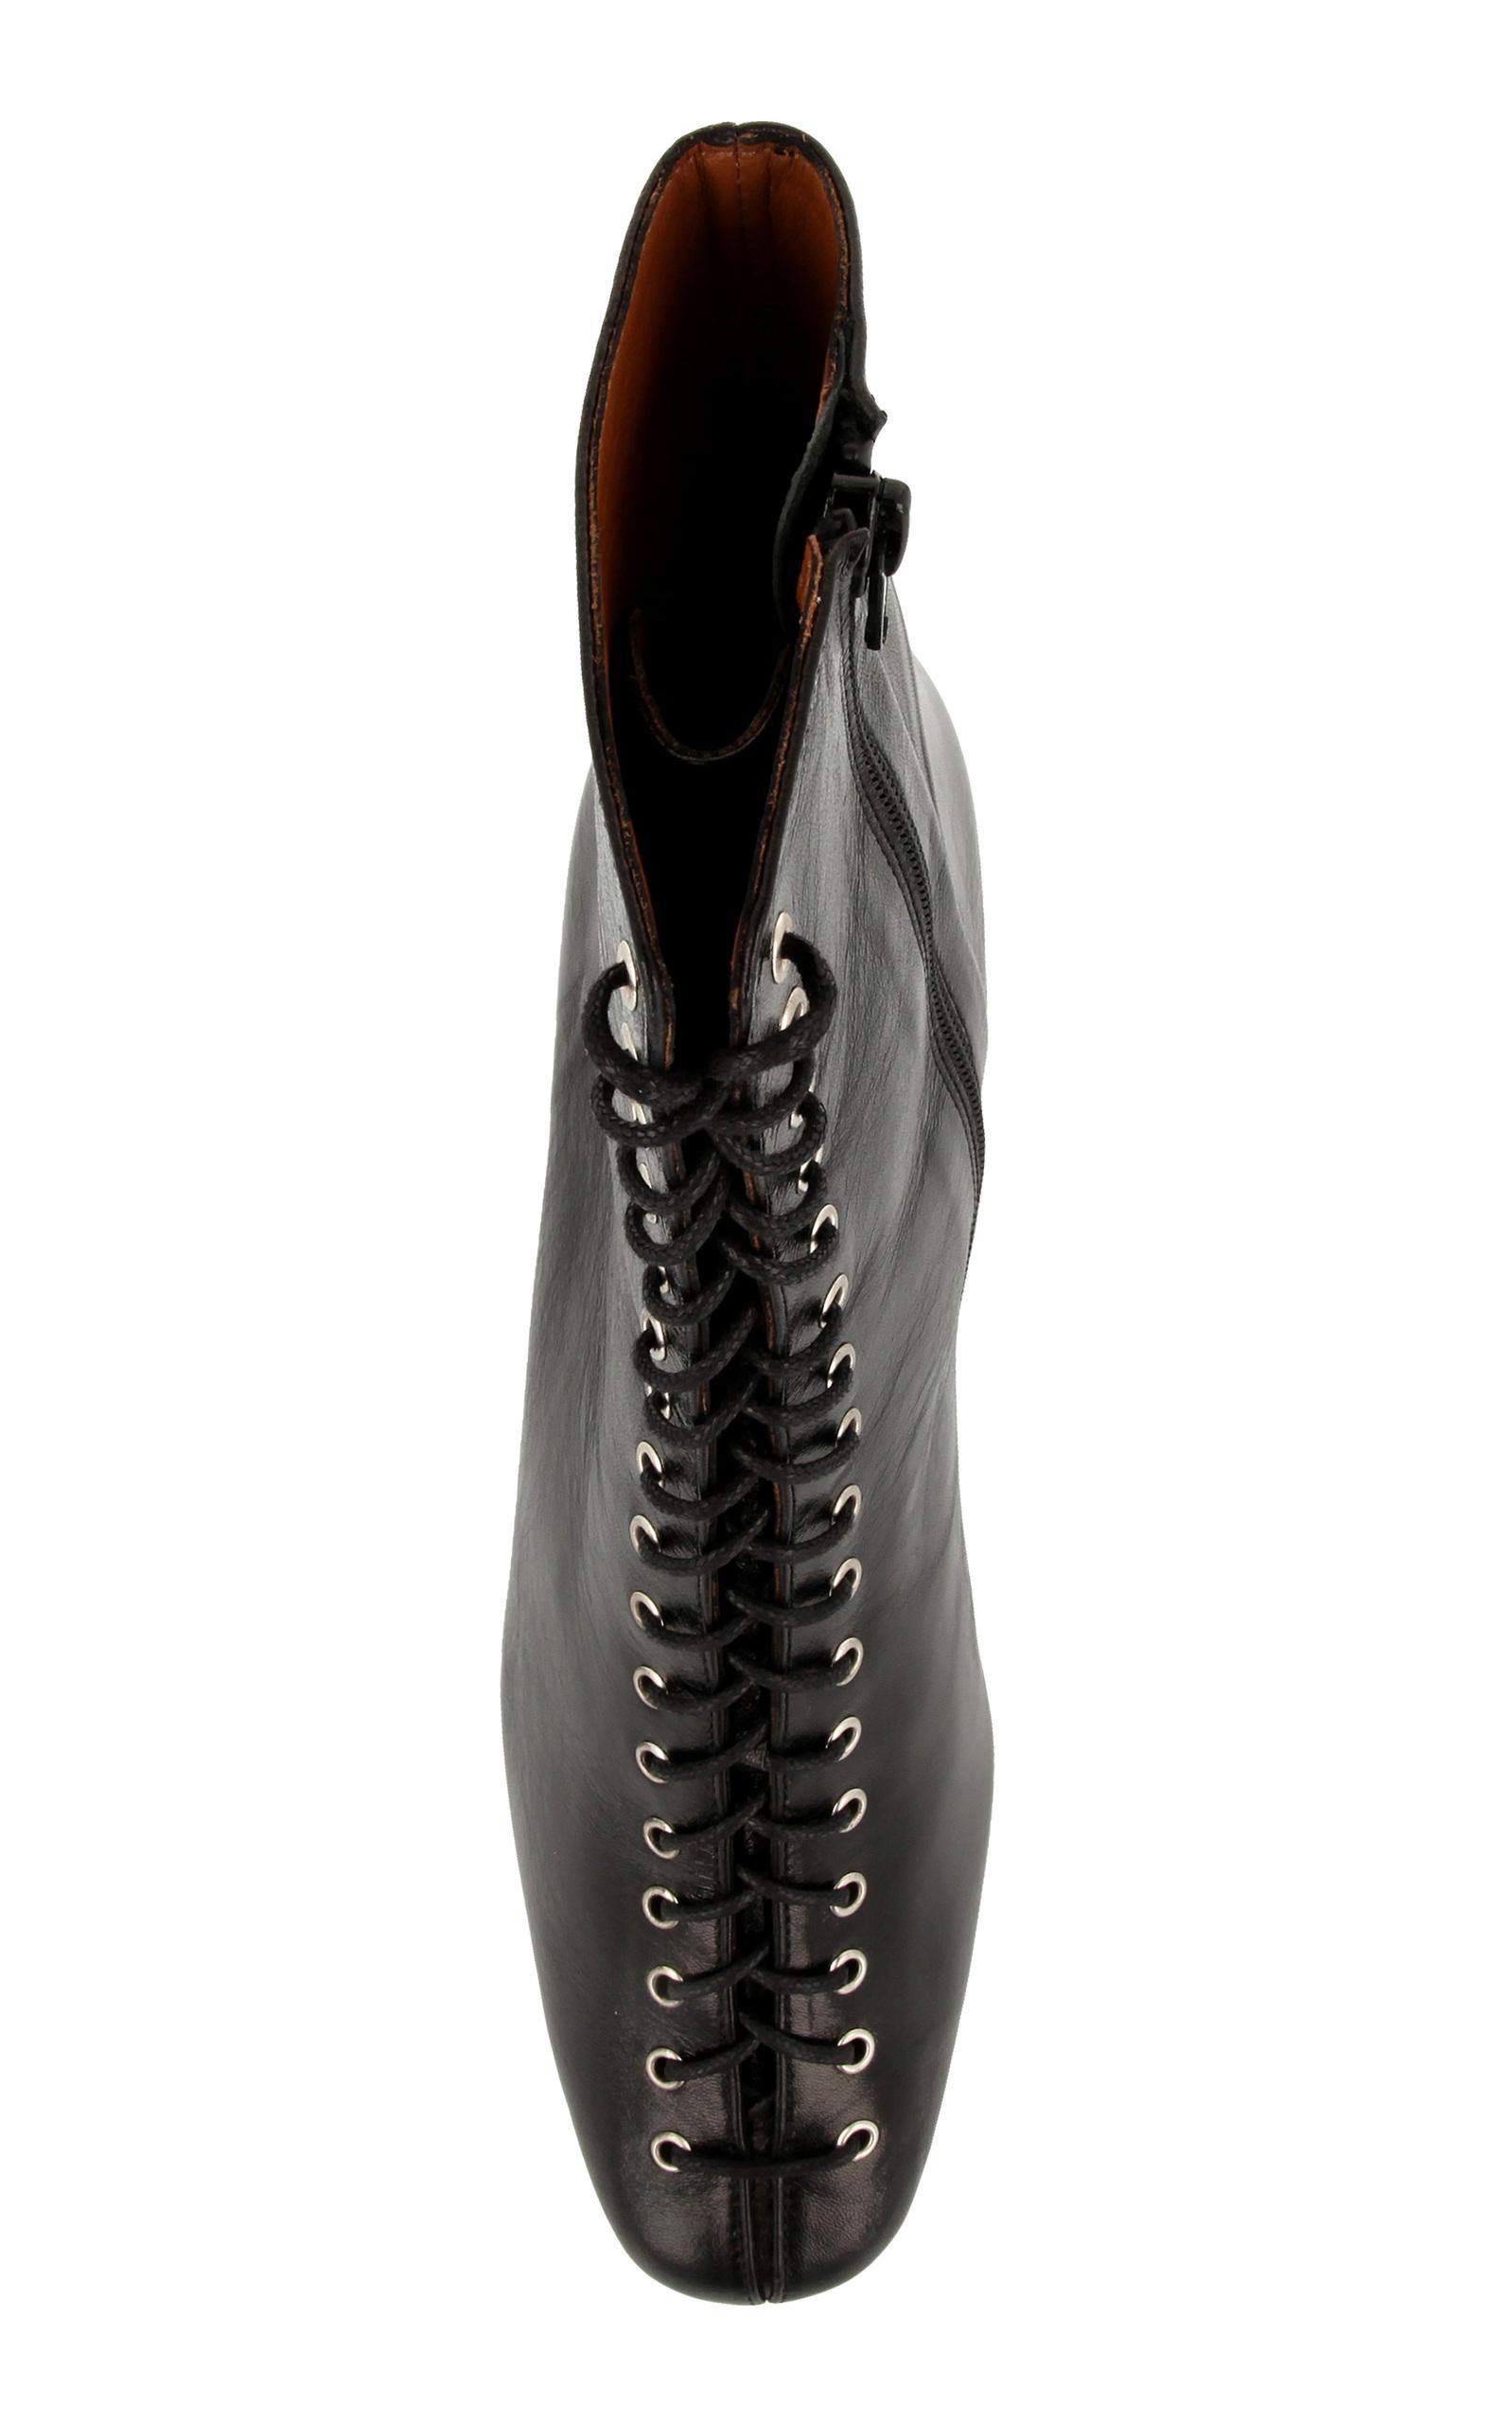 BY FAR Becca Lace Up Leather Boot in Black - Lyst1598 x 2560